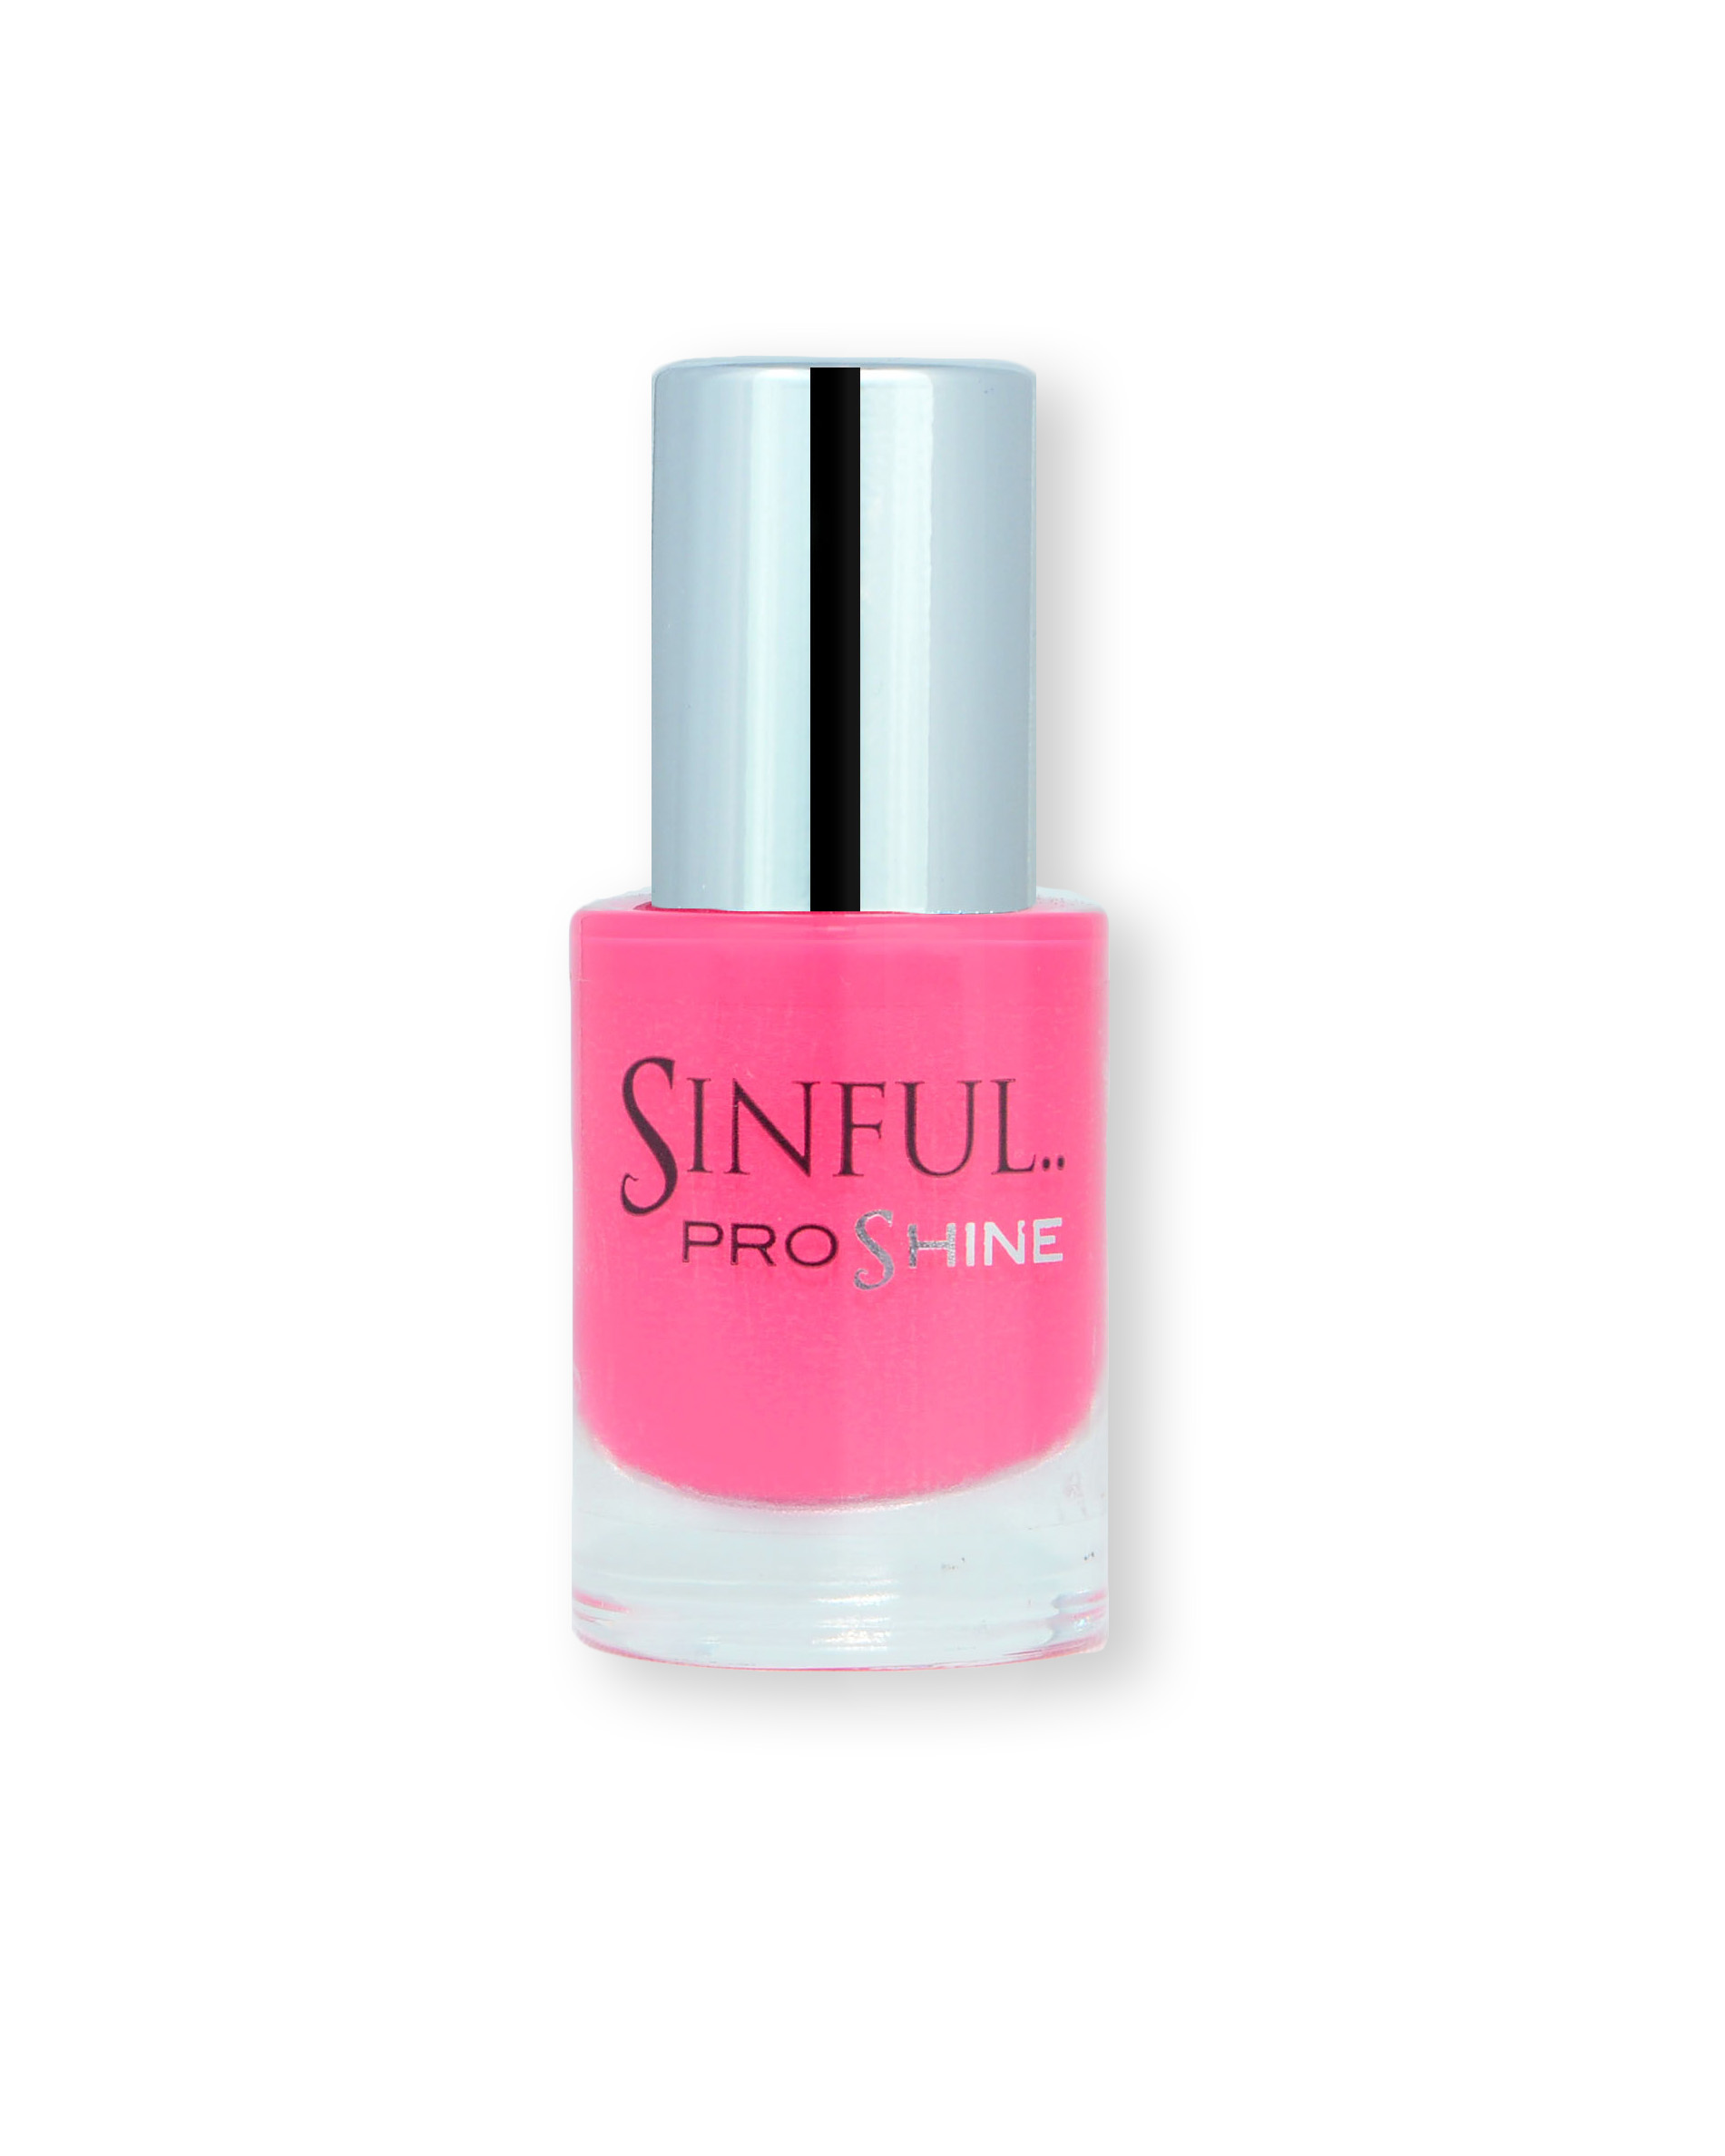 Sinful PROshine is a revolution into top spec imitation gel-like formula, easy application, full coverage and a sleek finish. Spoil yourself with the choice of 42 shades, expertly formulated with the finest grade of pigments. Heartbreak: Strawberry pink with a creme finish